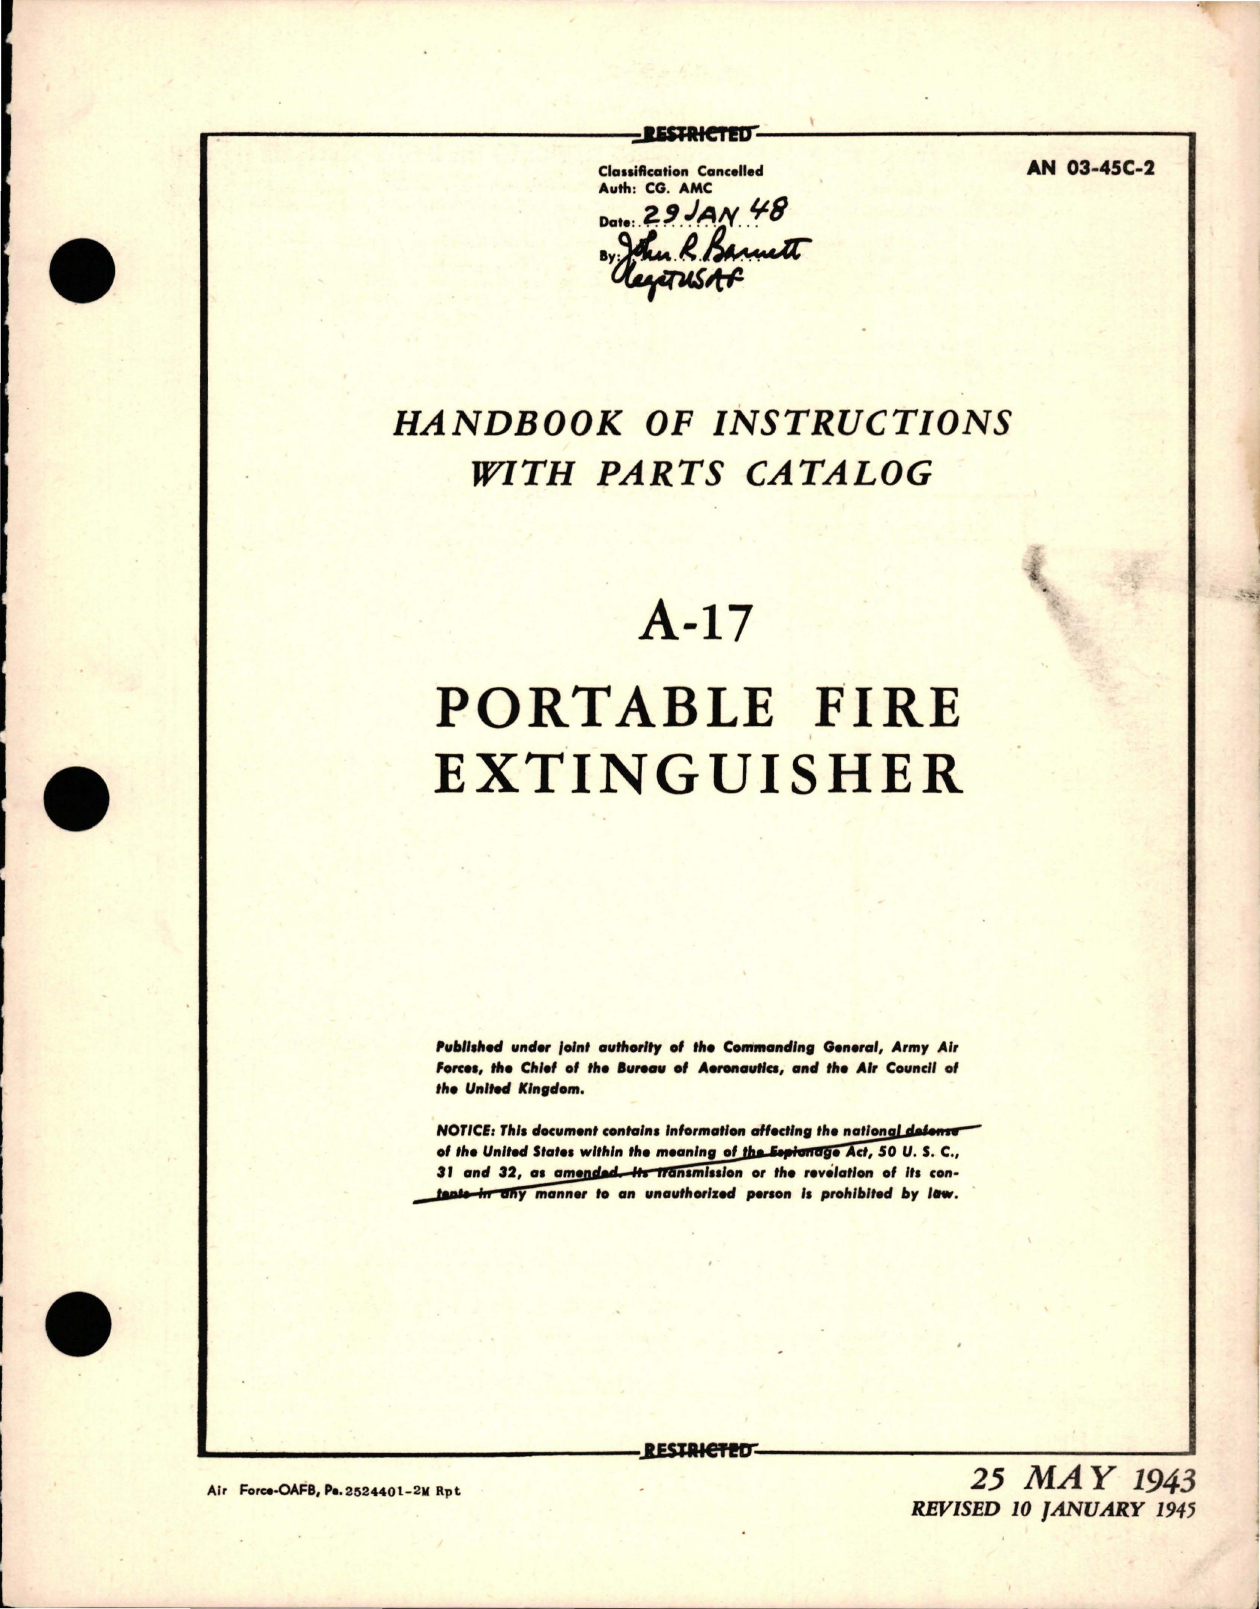 Sample page 1 from AirCorps Library document: Instructions with Parts Catalog for A-17 Portable Fire Extinguisher